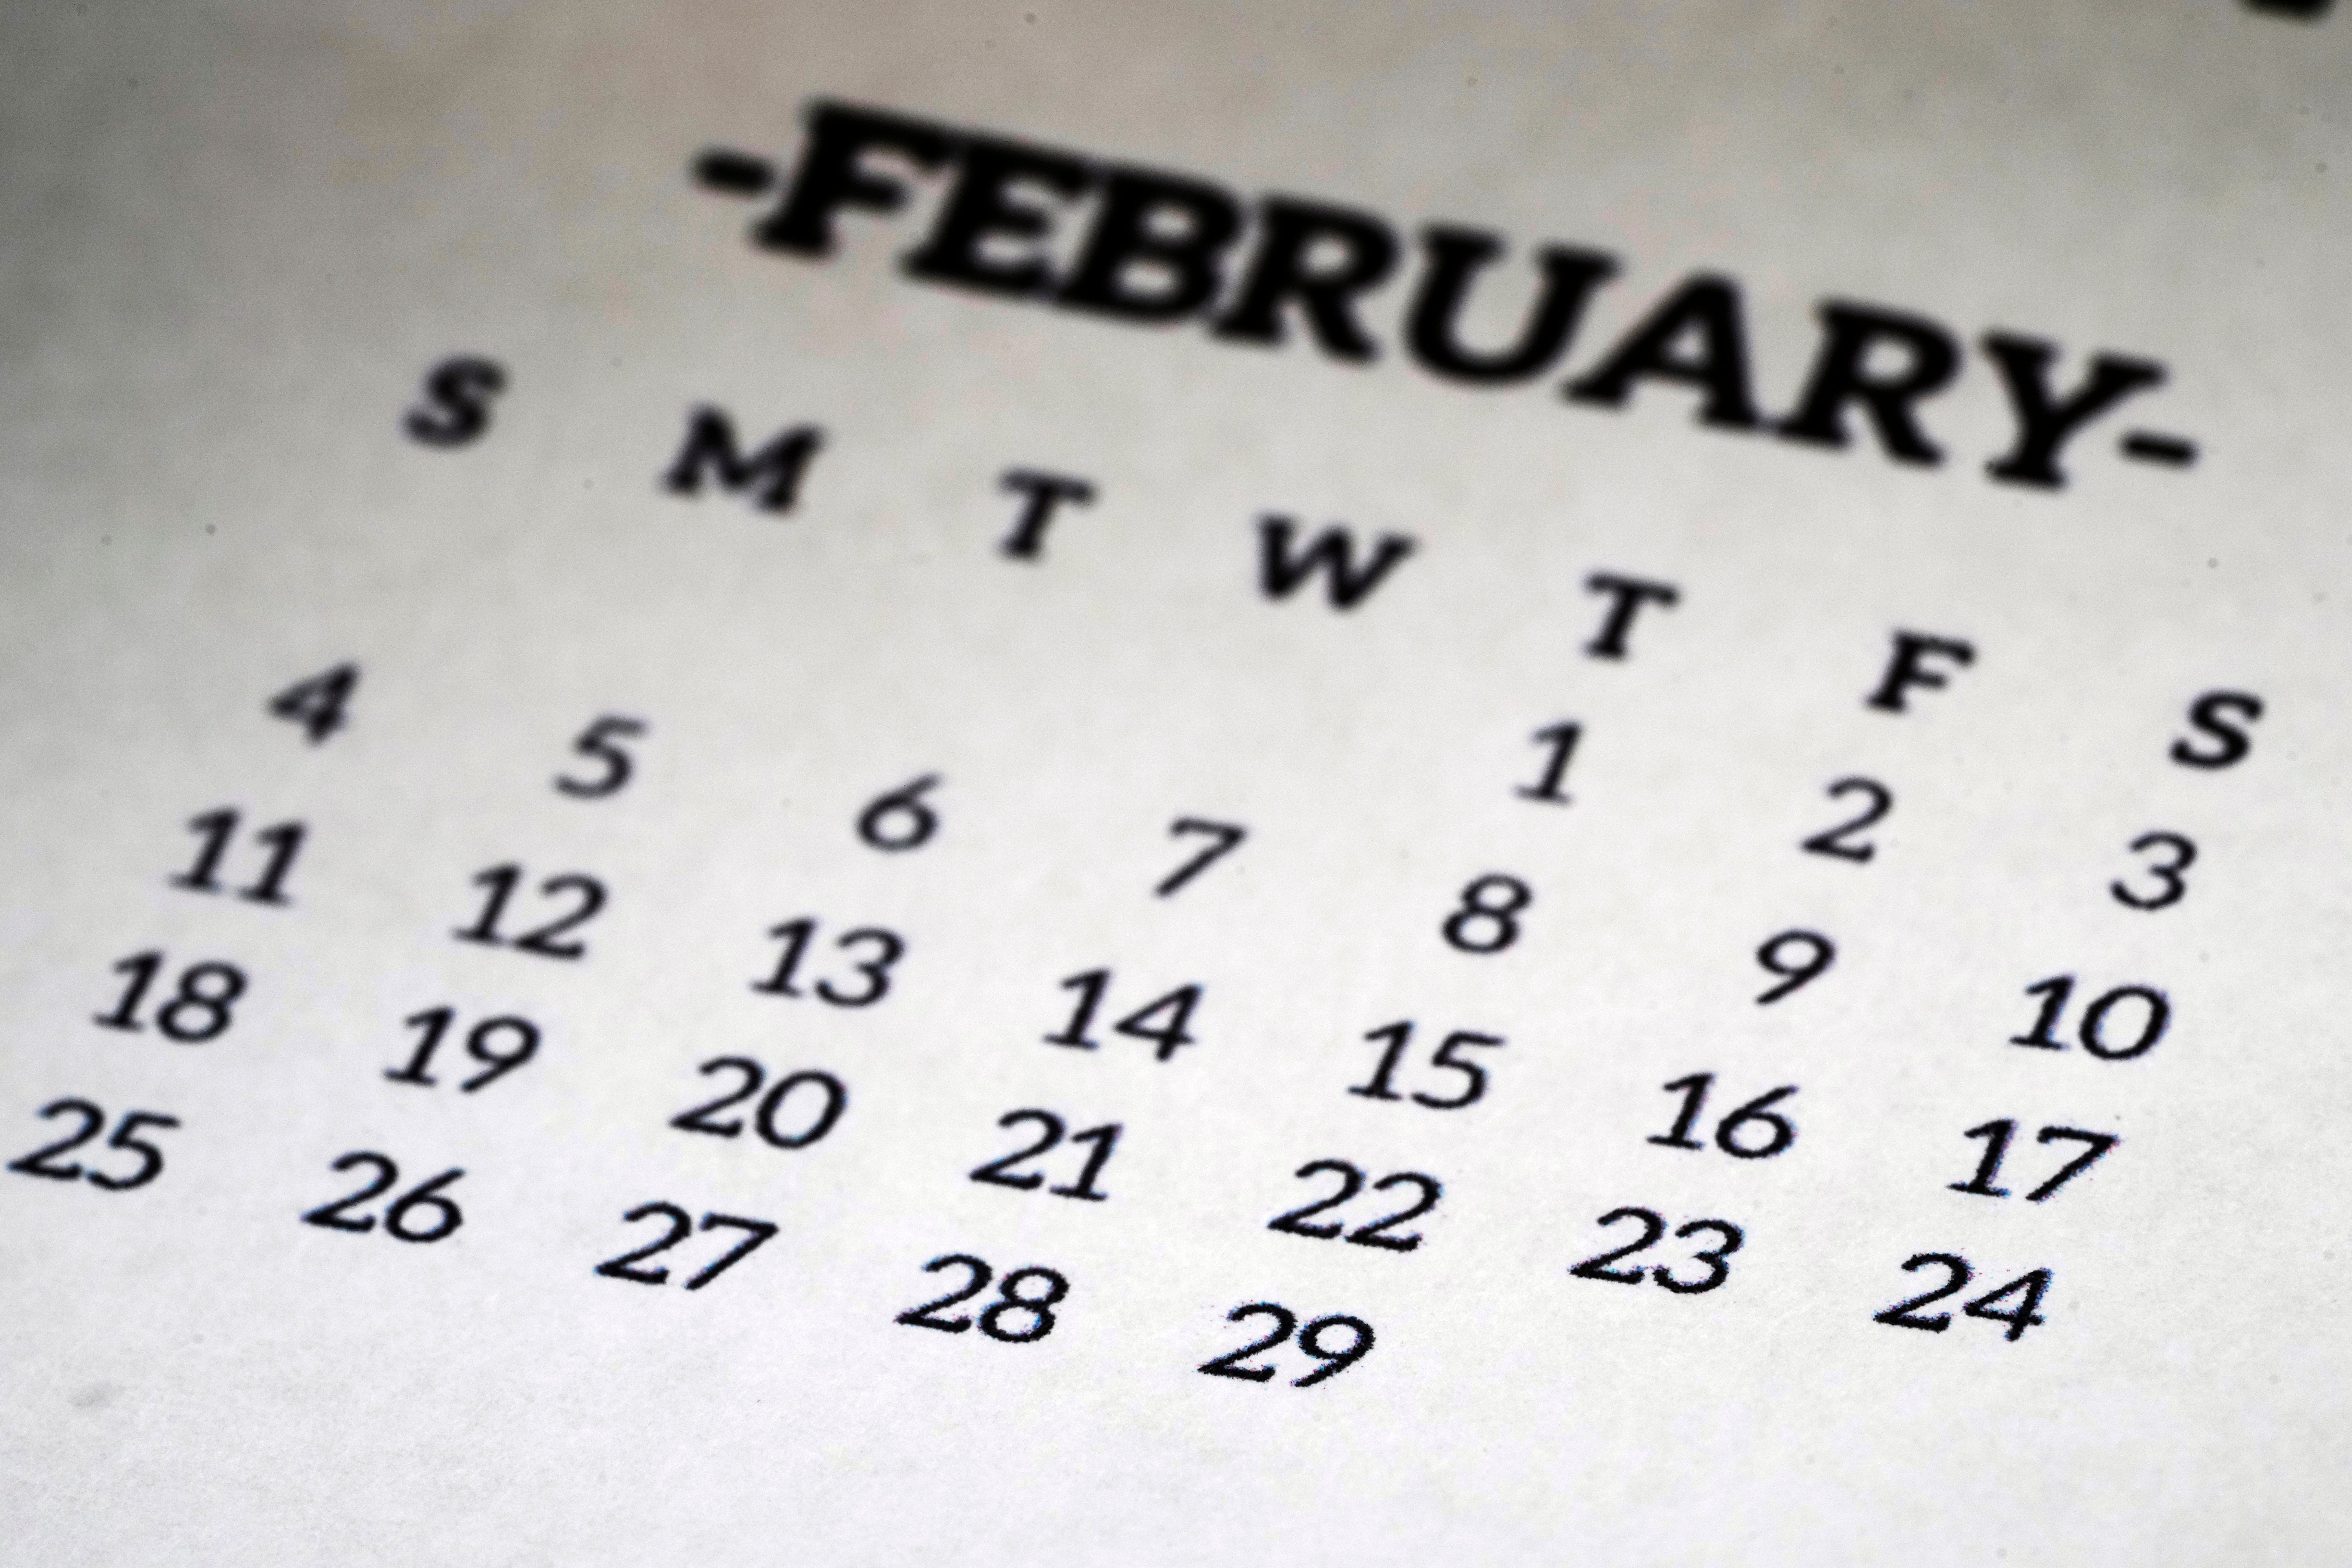 A calendar shows the month of February, including leap day, Febuary 29